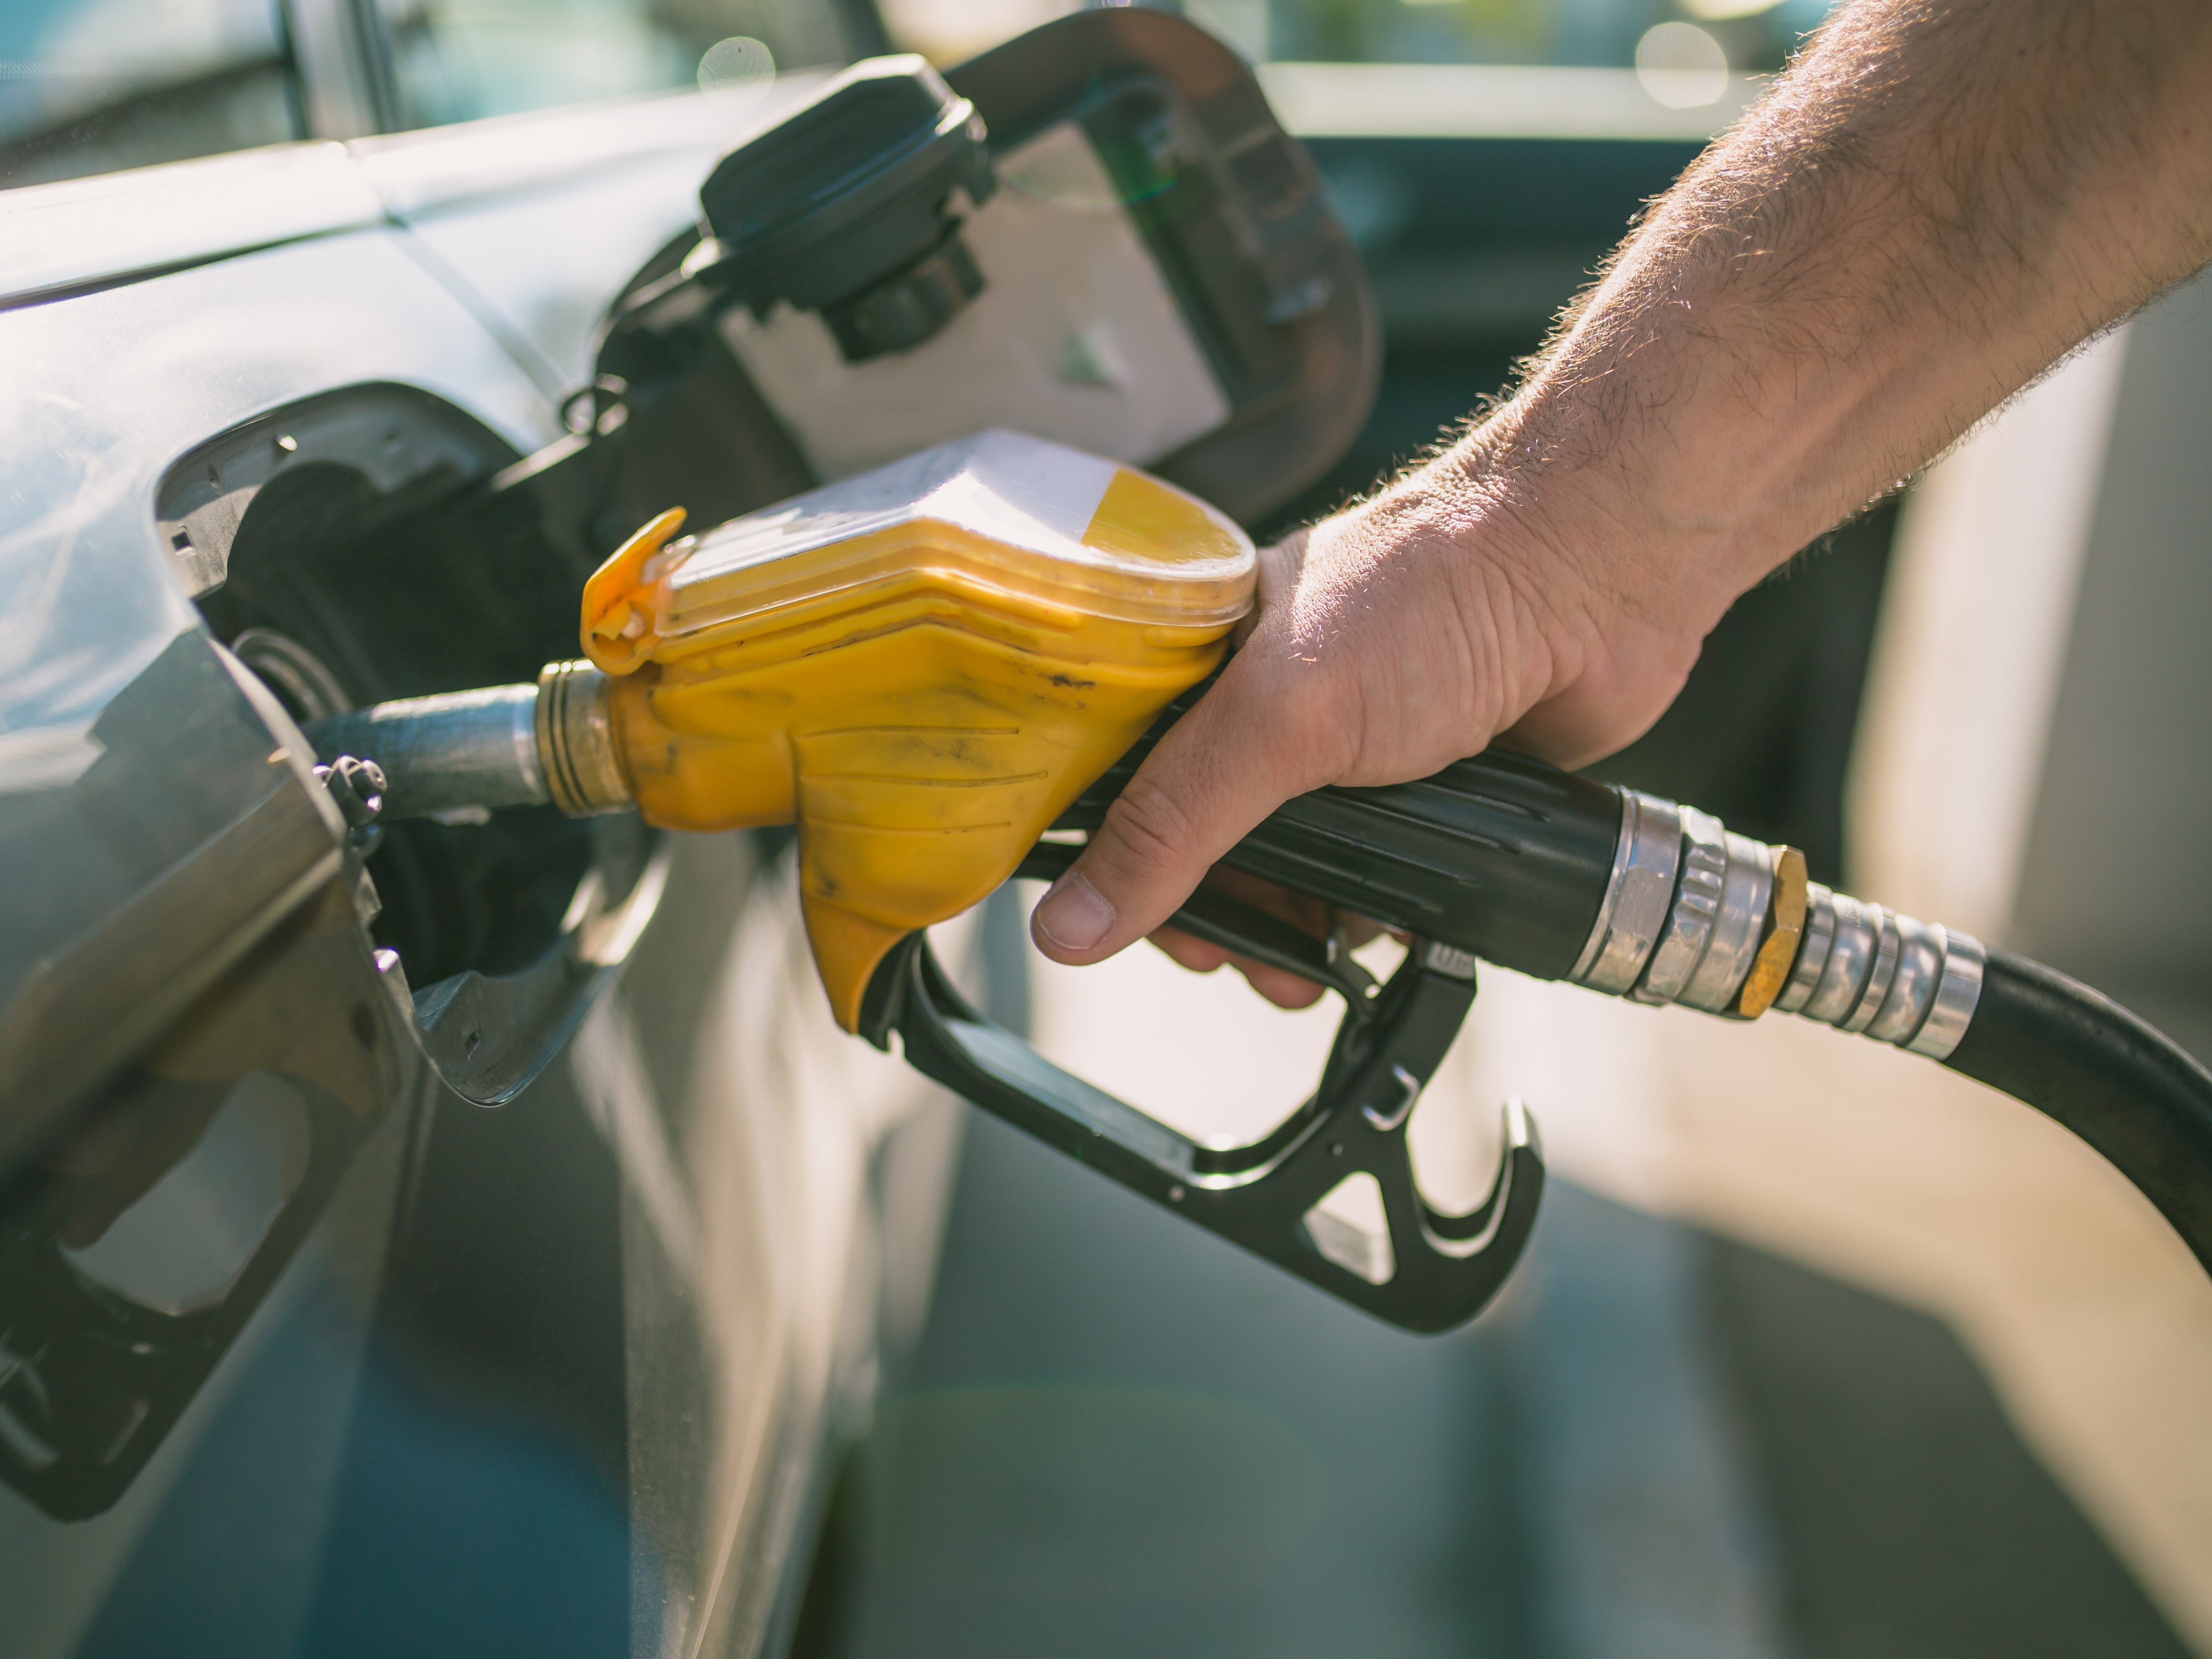 Fuel prices have hit another record high in the UK